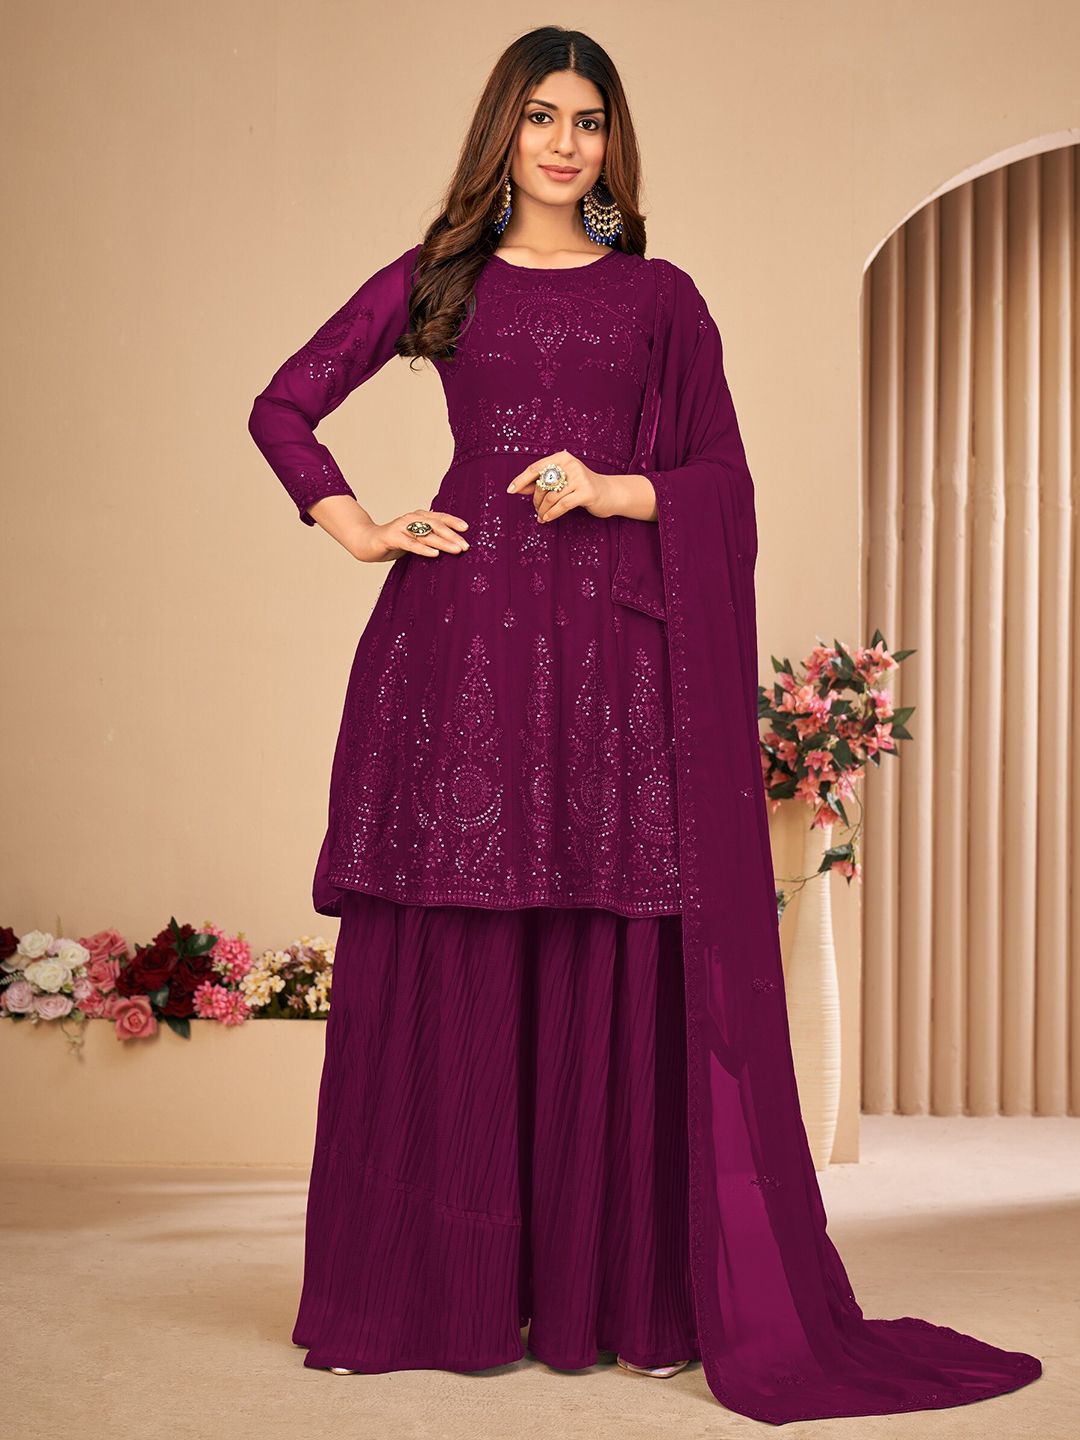 Divine International Trading Co Purple Sequins Embroidered Unstitched Dress Material Price in India